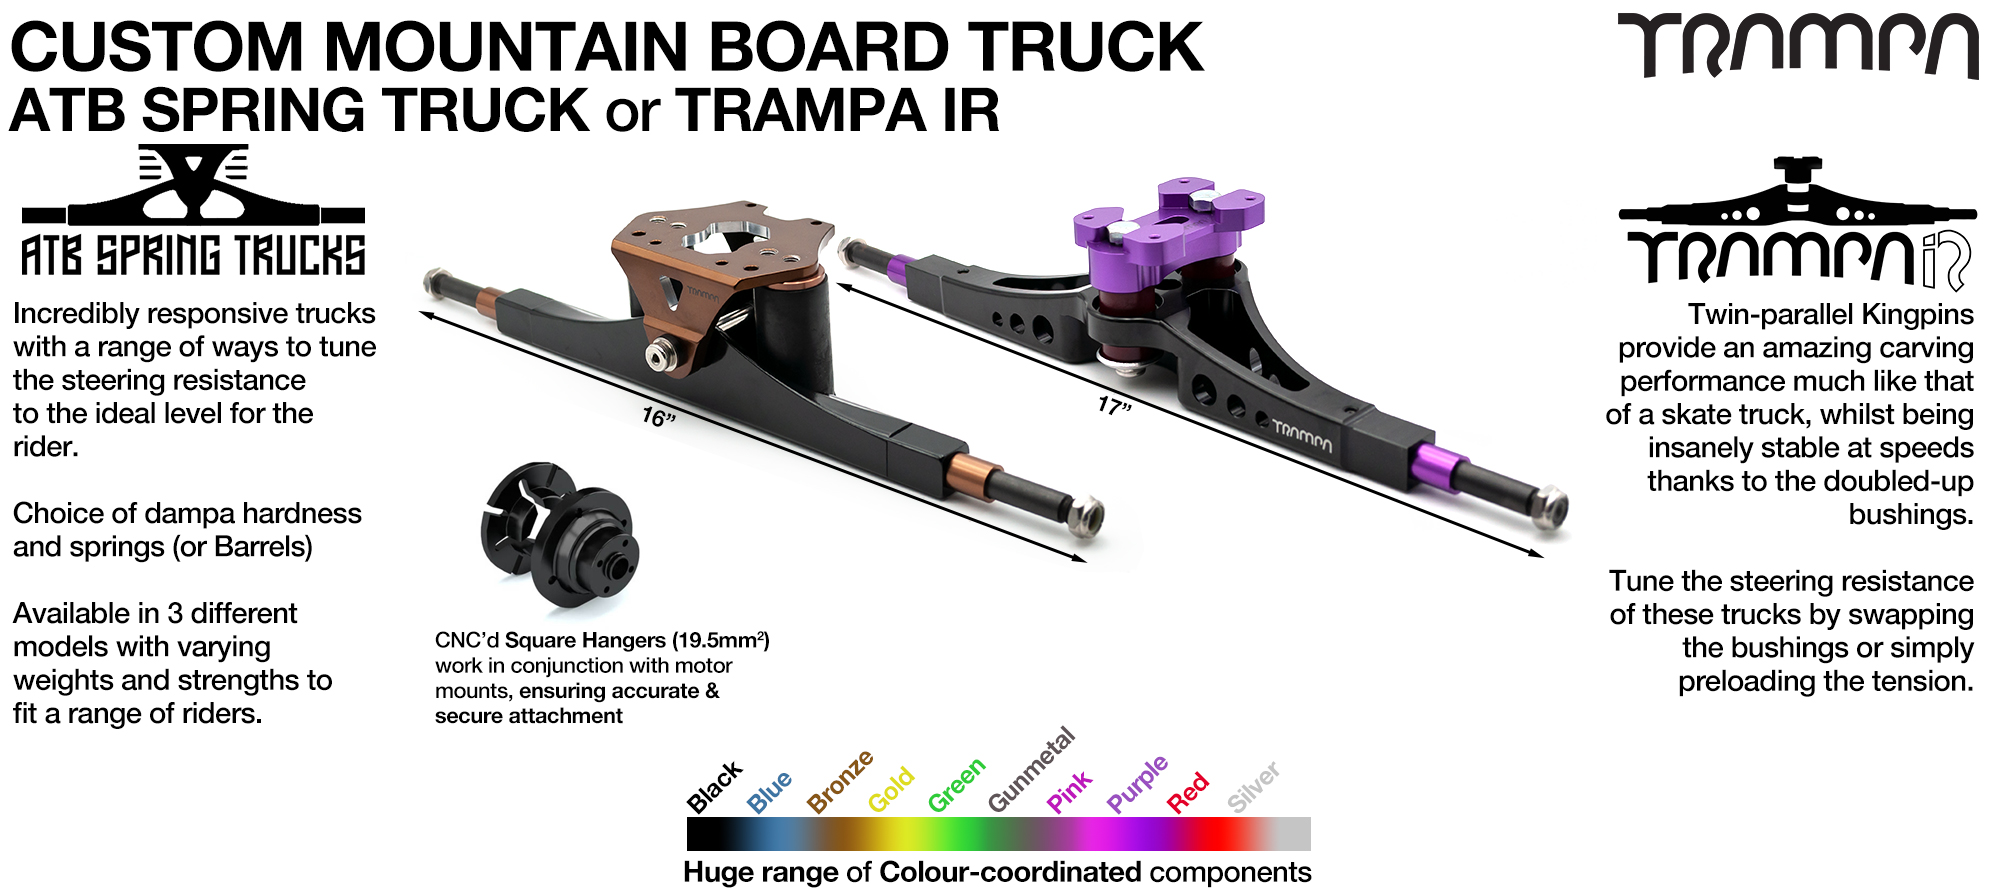 Custom Mountainboard Truck CNC Precision made 16 or 17 Inch wide Mountainboard Trucks 'Channel Style (Spring) or 'Double King-Pinned' (Skate) Style